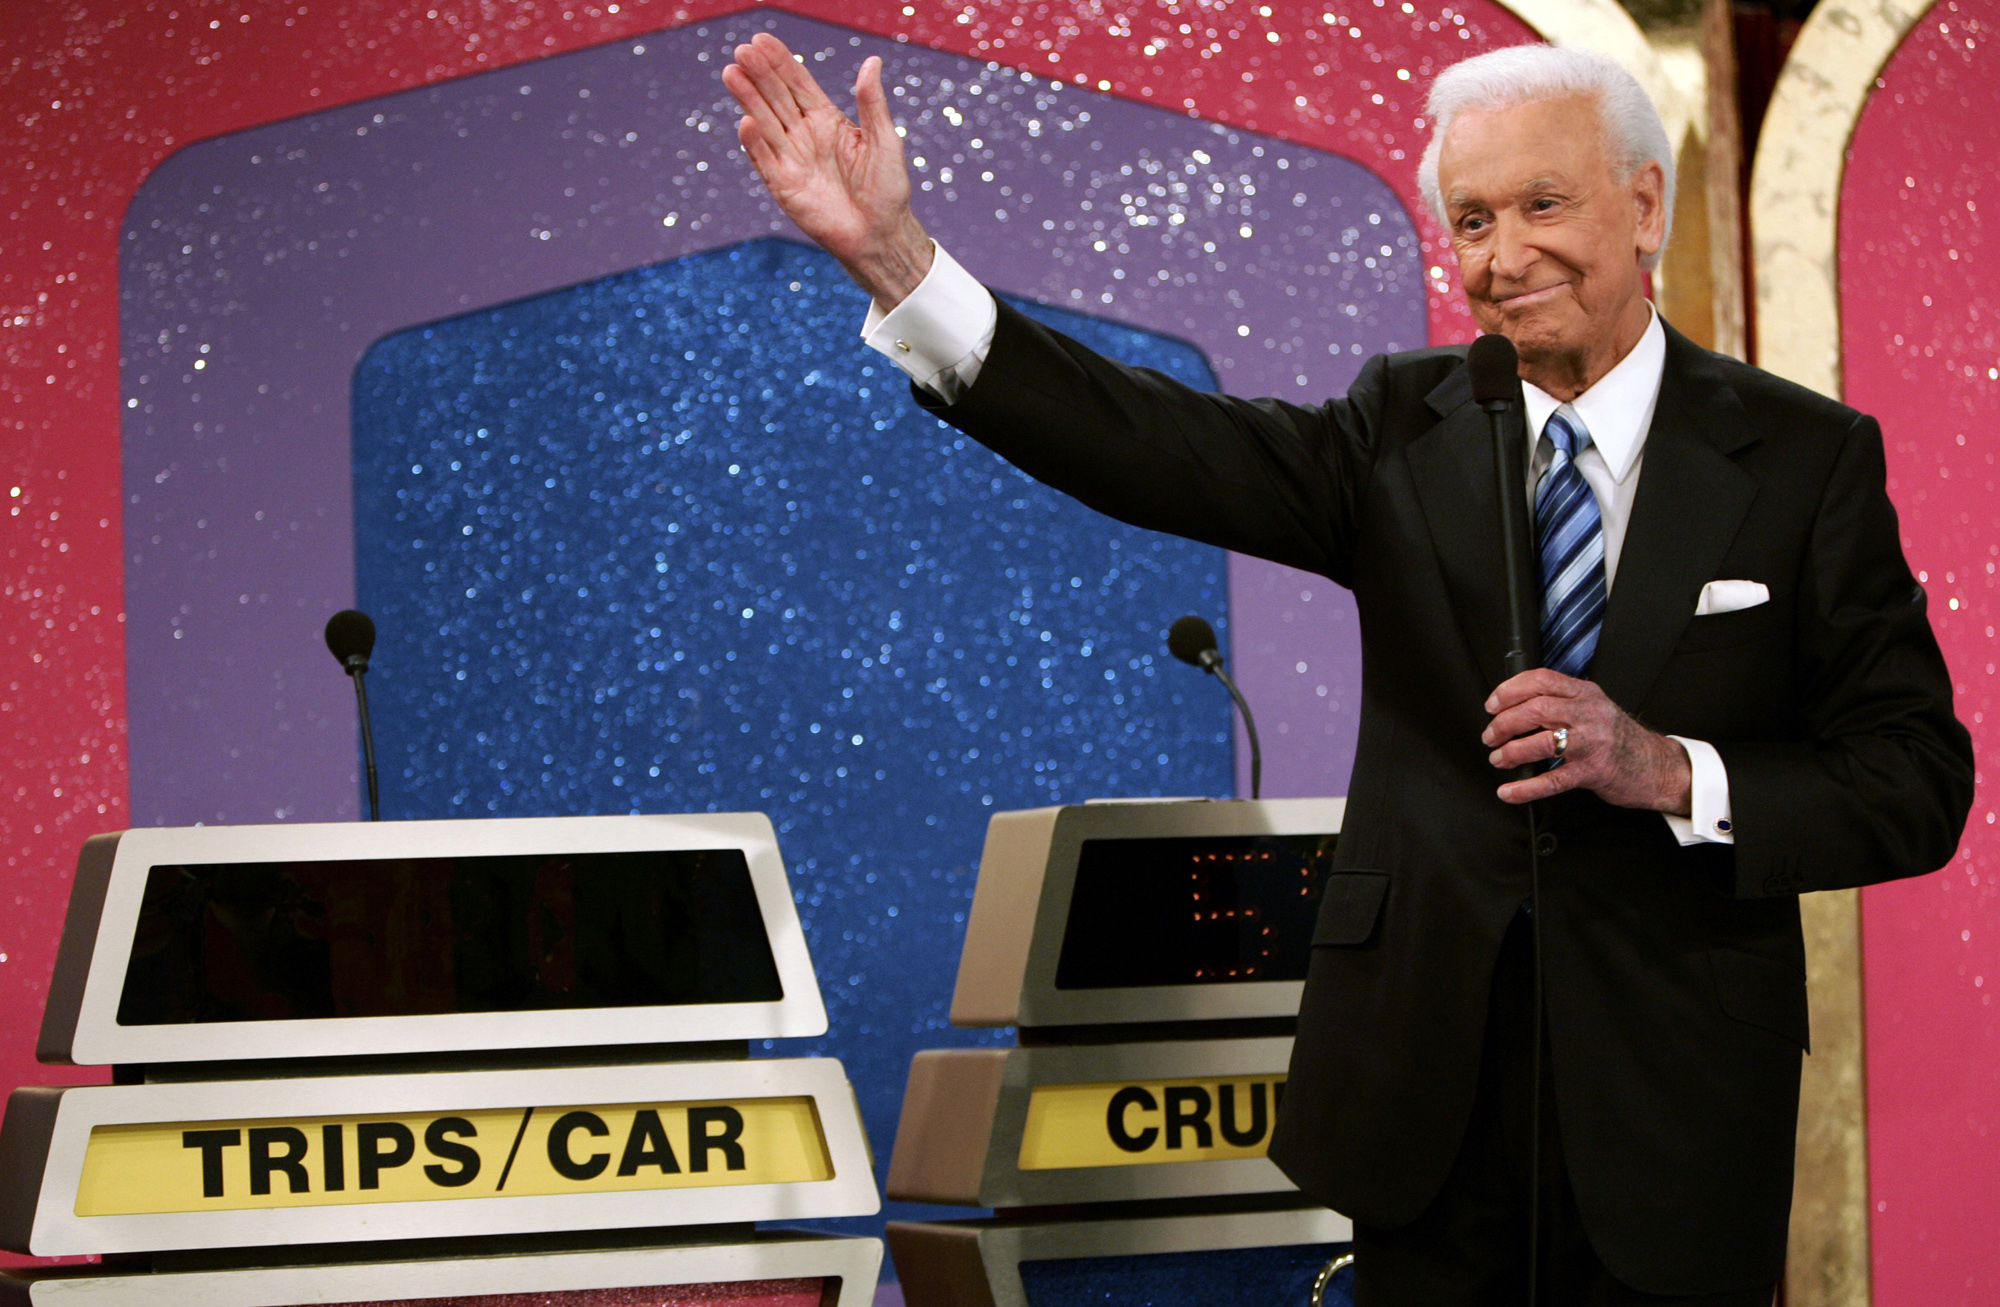 FILE - Legendary game show host Bob Barker, 83, waves goodbye as he tapes his final episode of "The Price Is Right," in Los Angeles on Wednesday, June 6, 2007. Barker signed off from 35 years on the game show and 50 years in daytime TV in the same low-key, genial fashion that made him one of daytime TV's biggest stars.